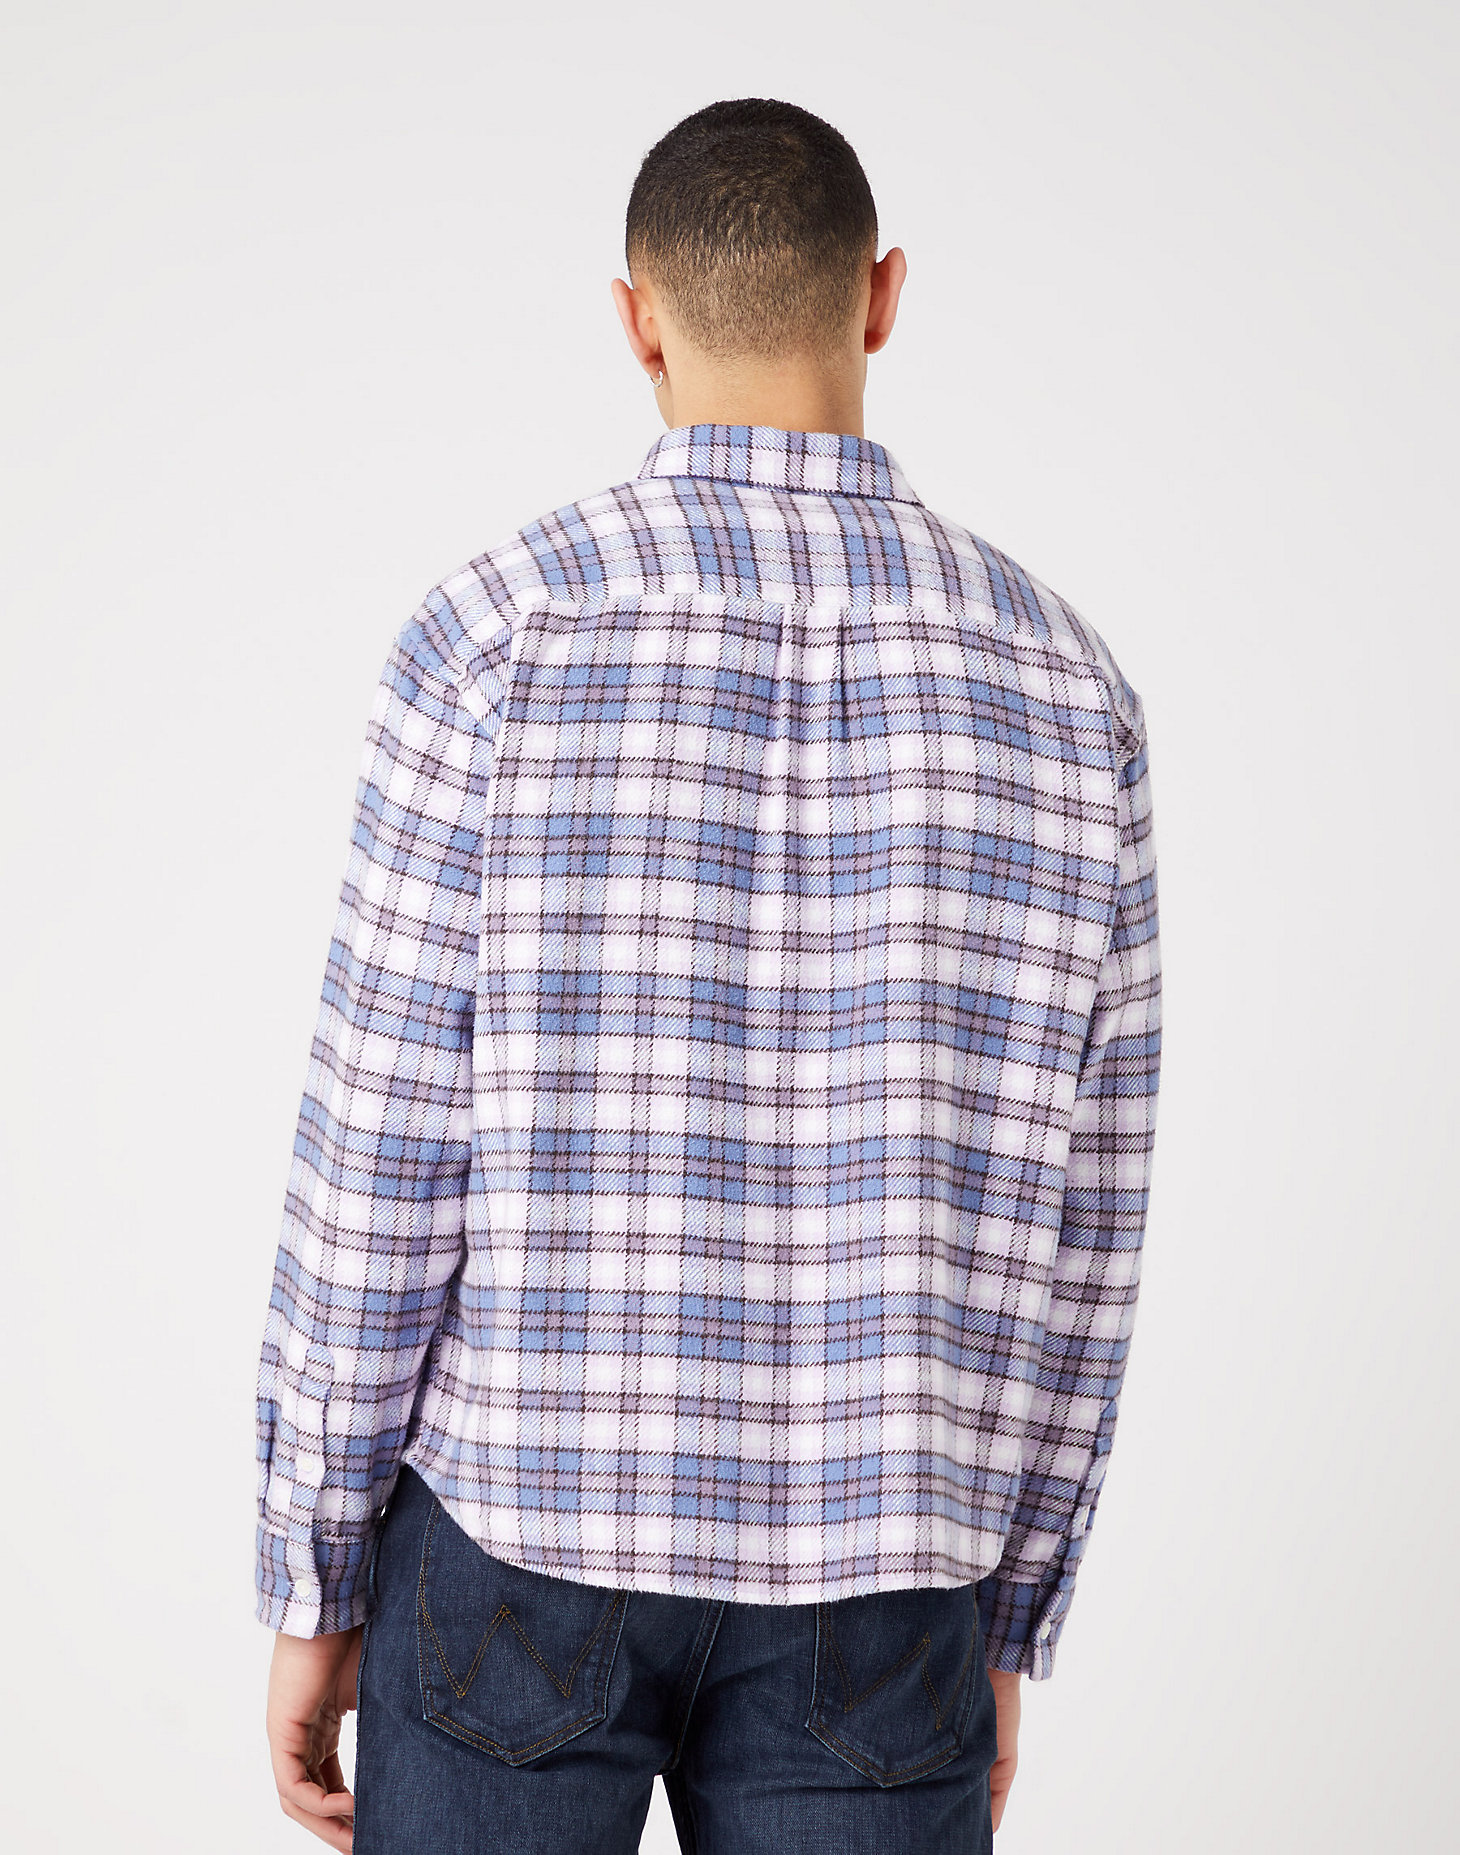 Long Sleeve One Pocket Shirt in Stone Wash Blue alternative view 2